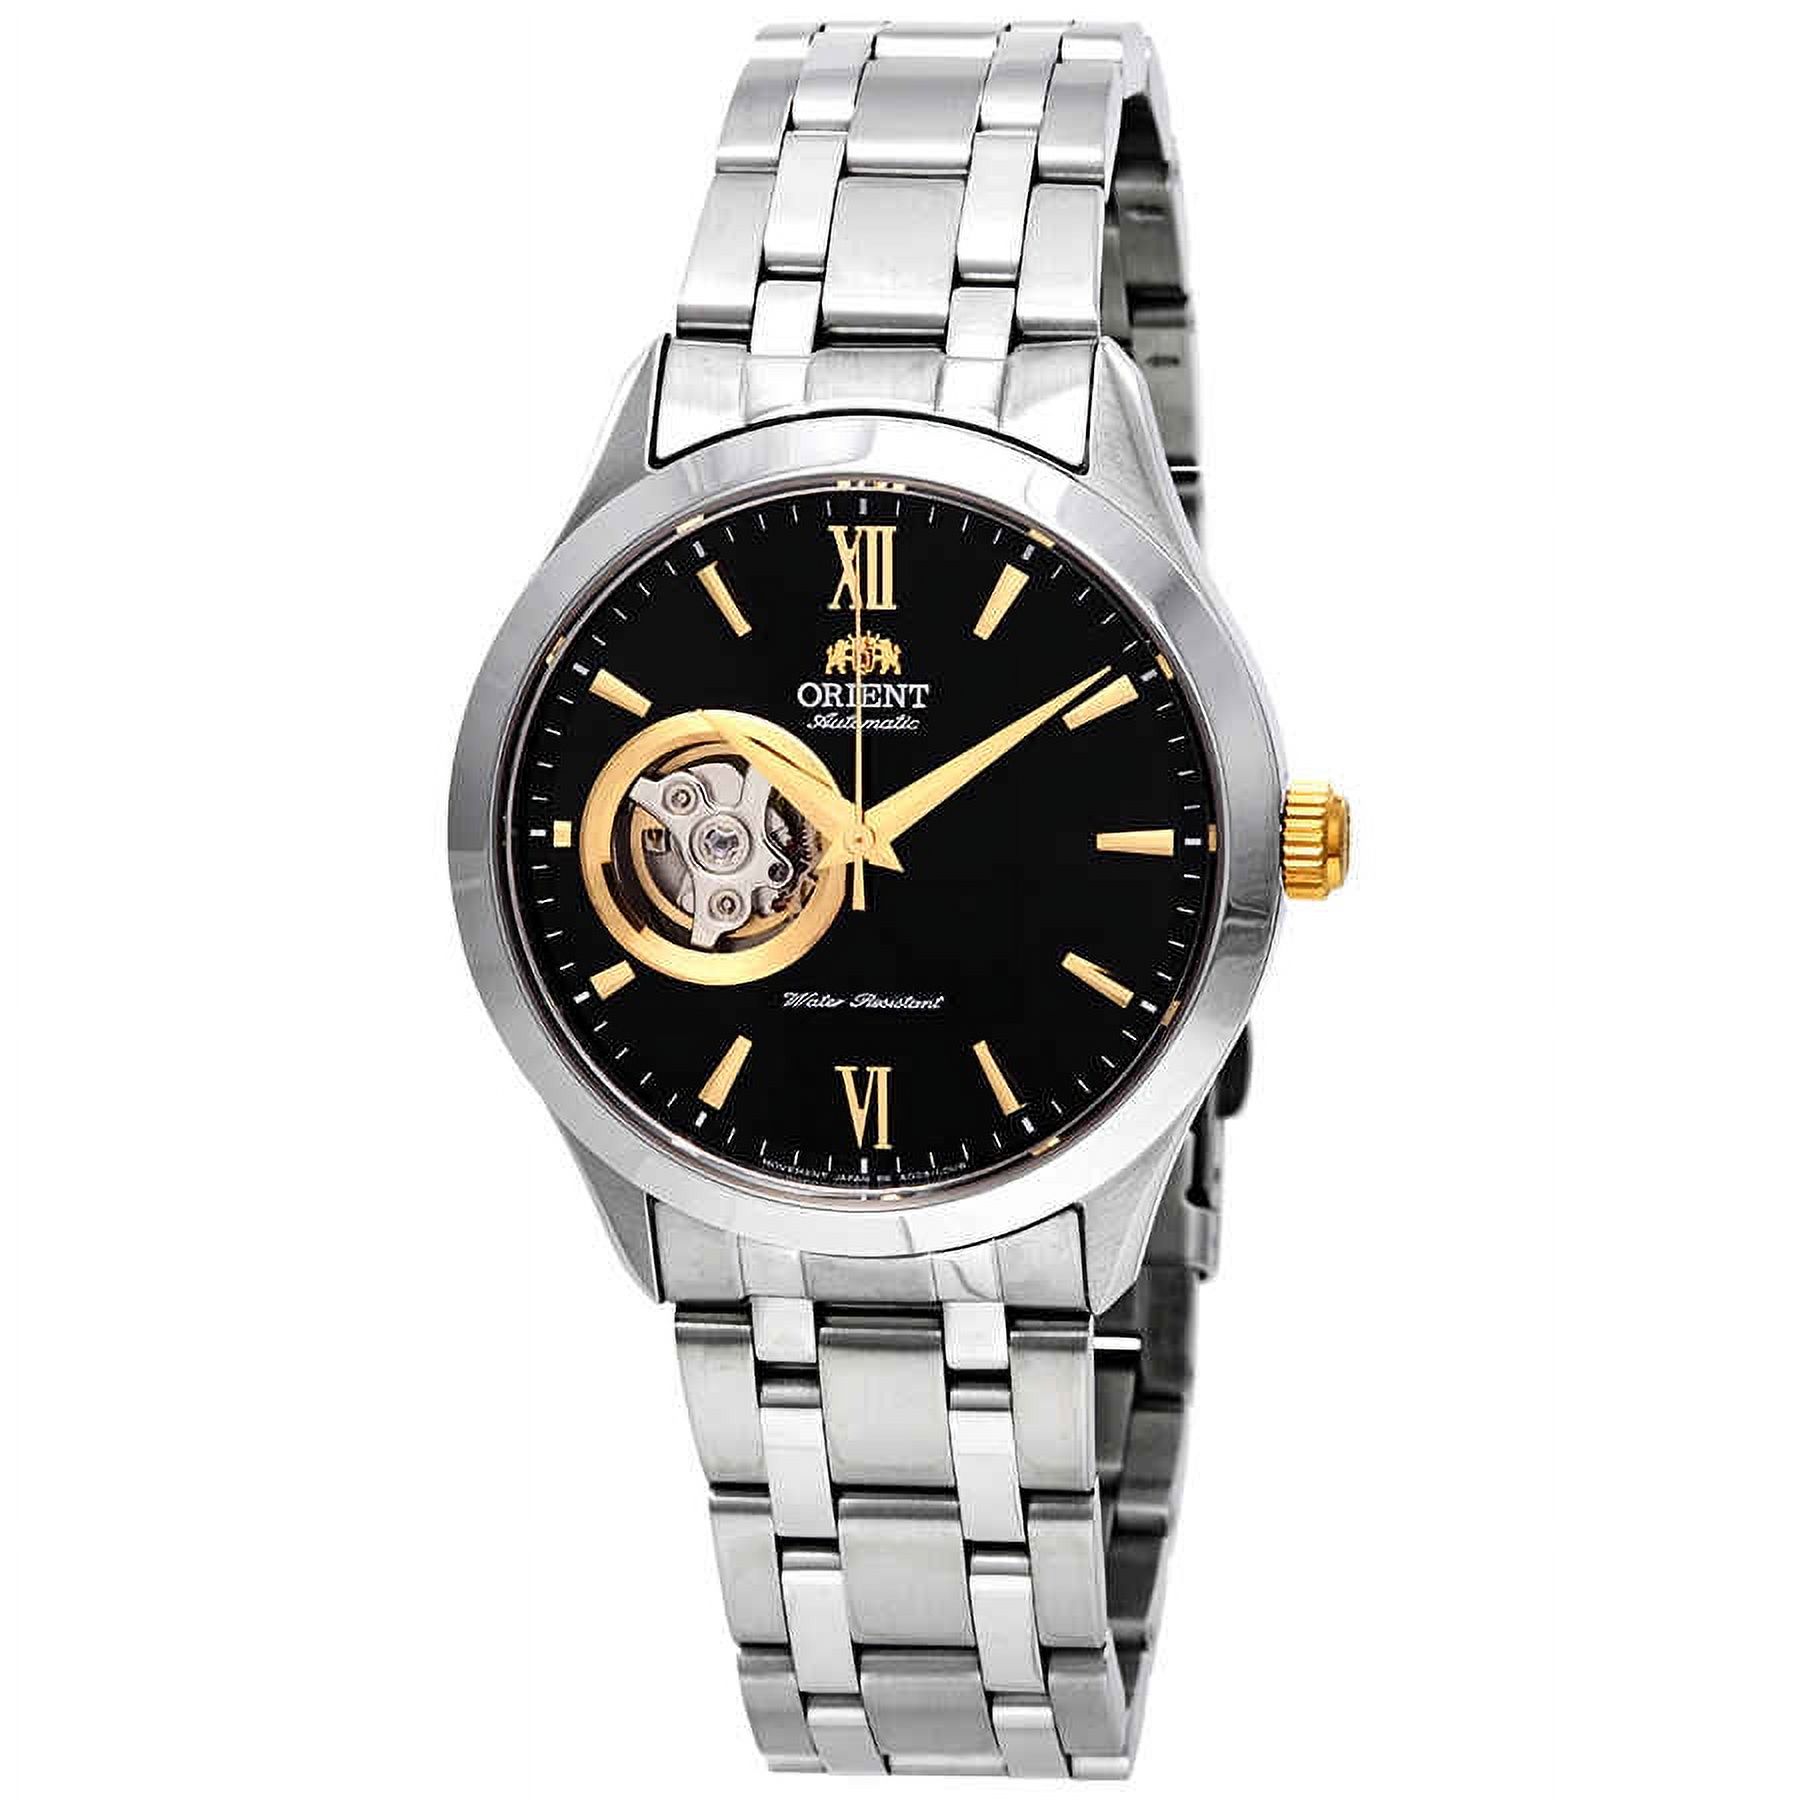 Orient Open Heart Automatic Black Dial Men's Watch FAG03002B0 - image 1 of 3